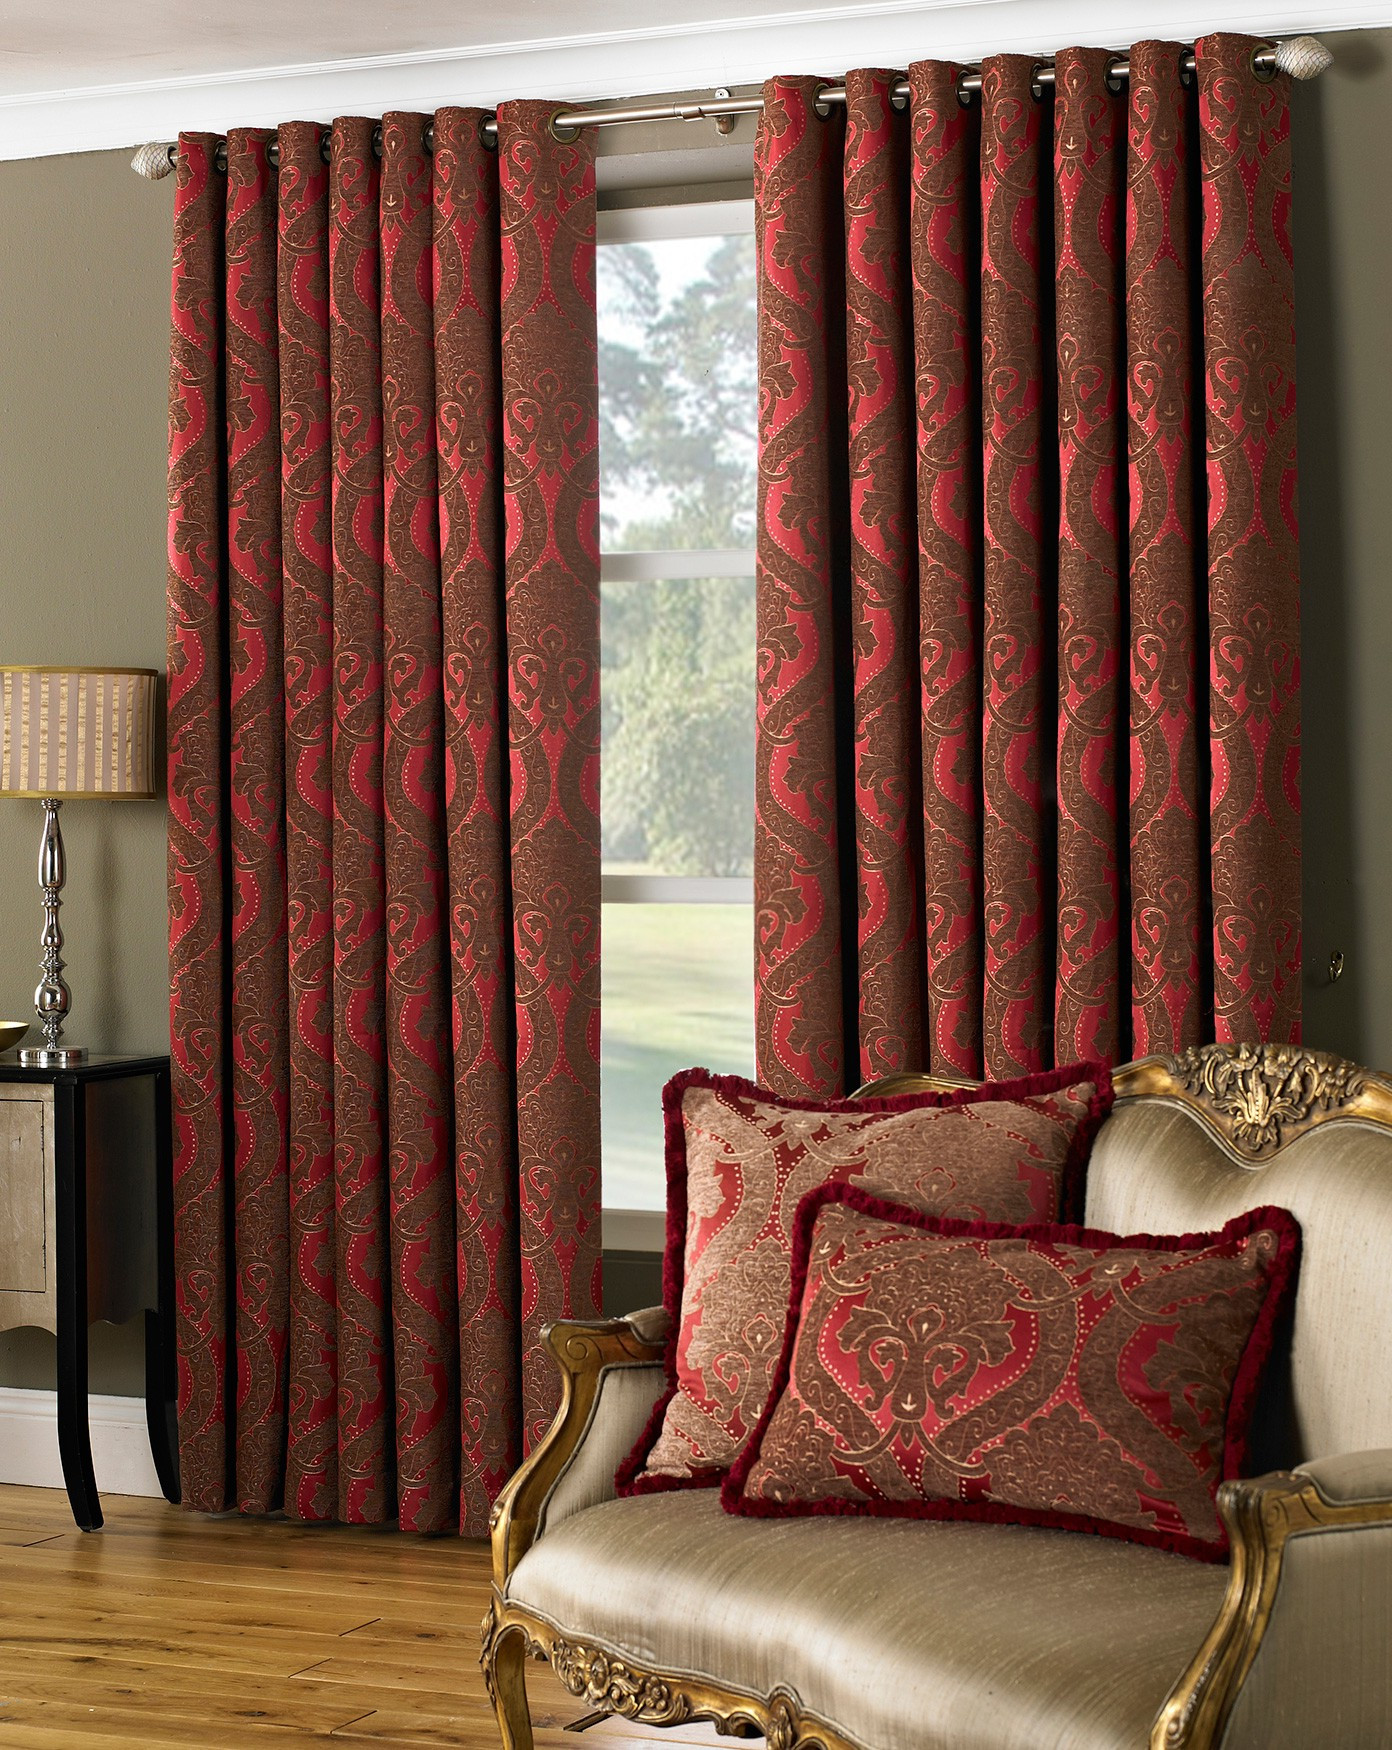 Decorative Curtains For Living Room
 Burgundy Curtains for Living Room